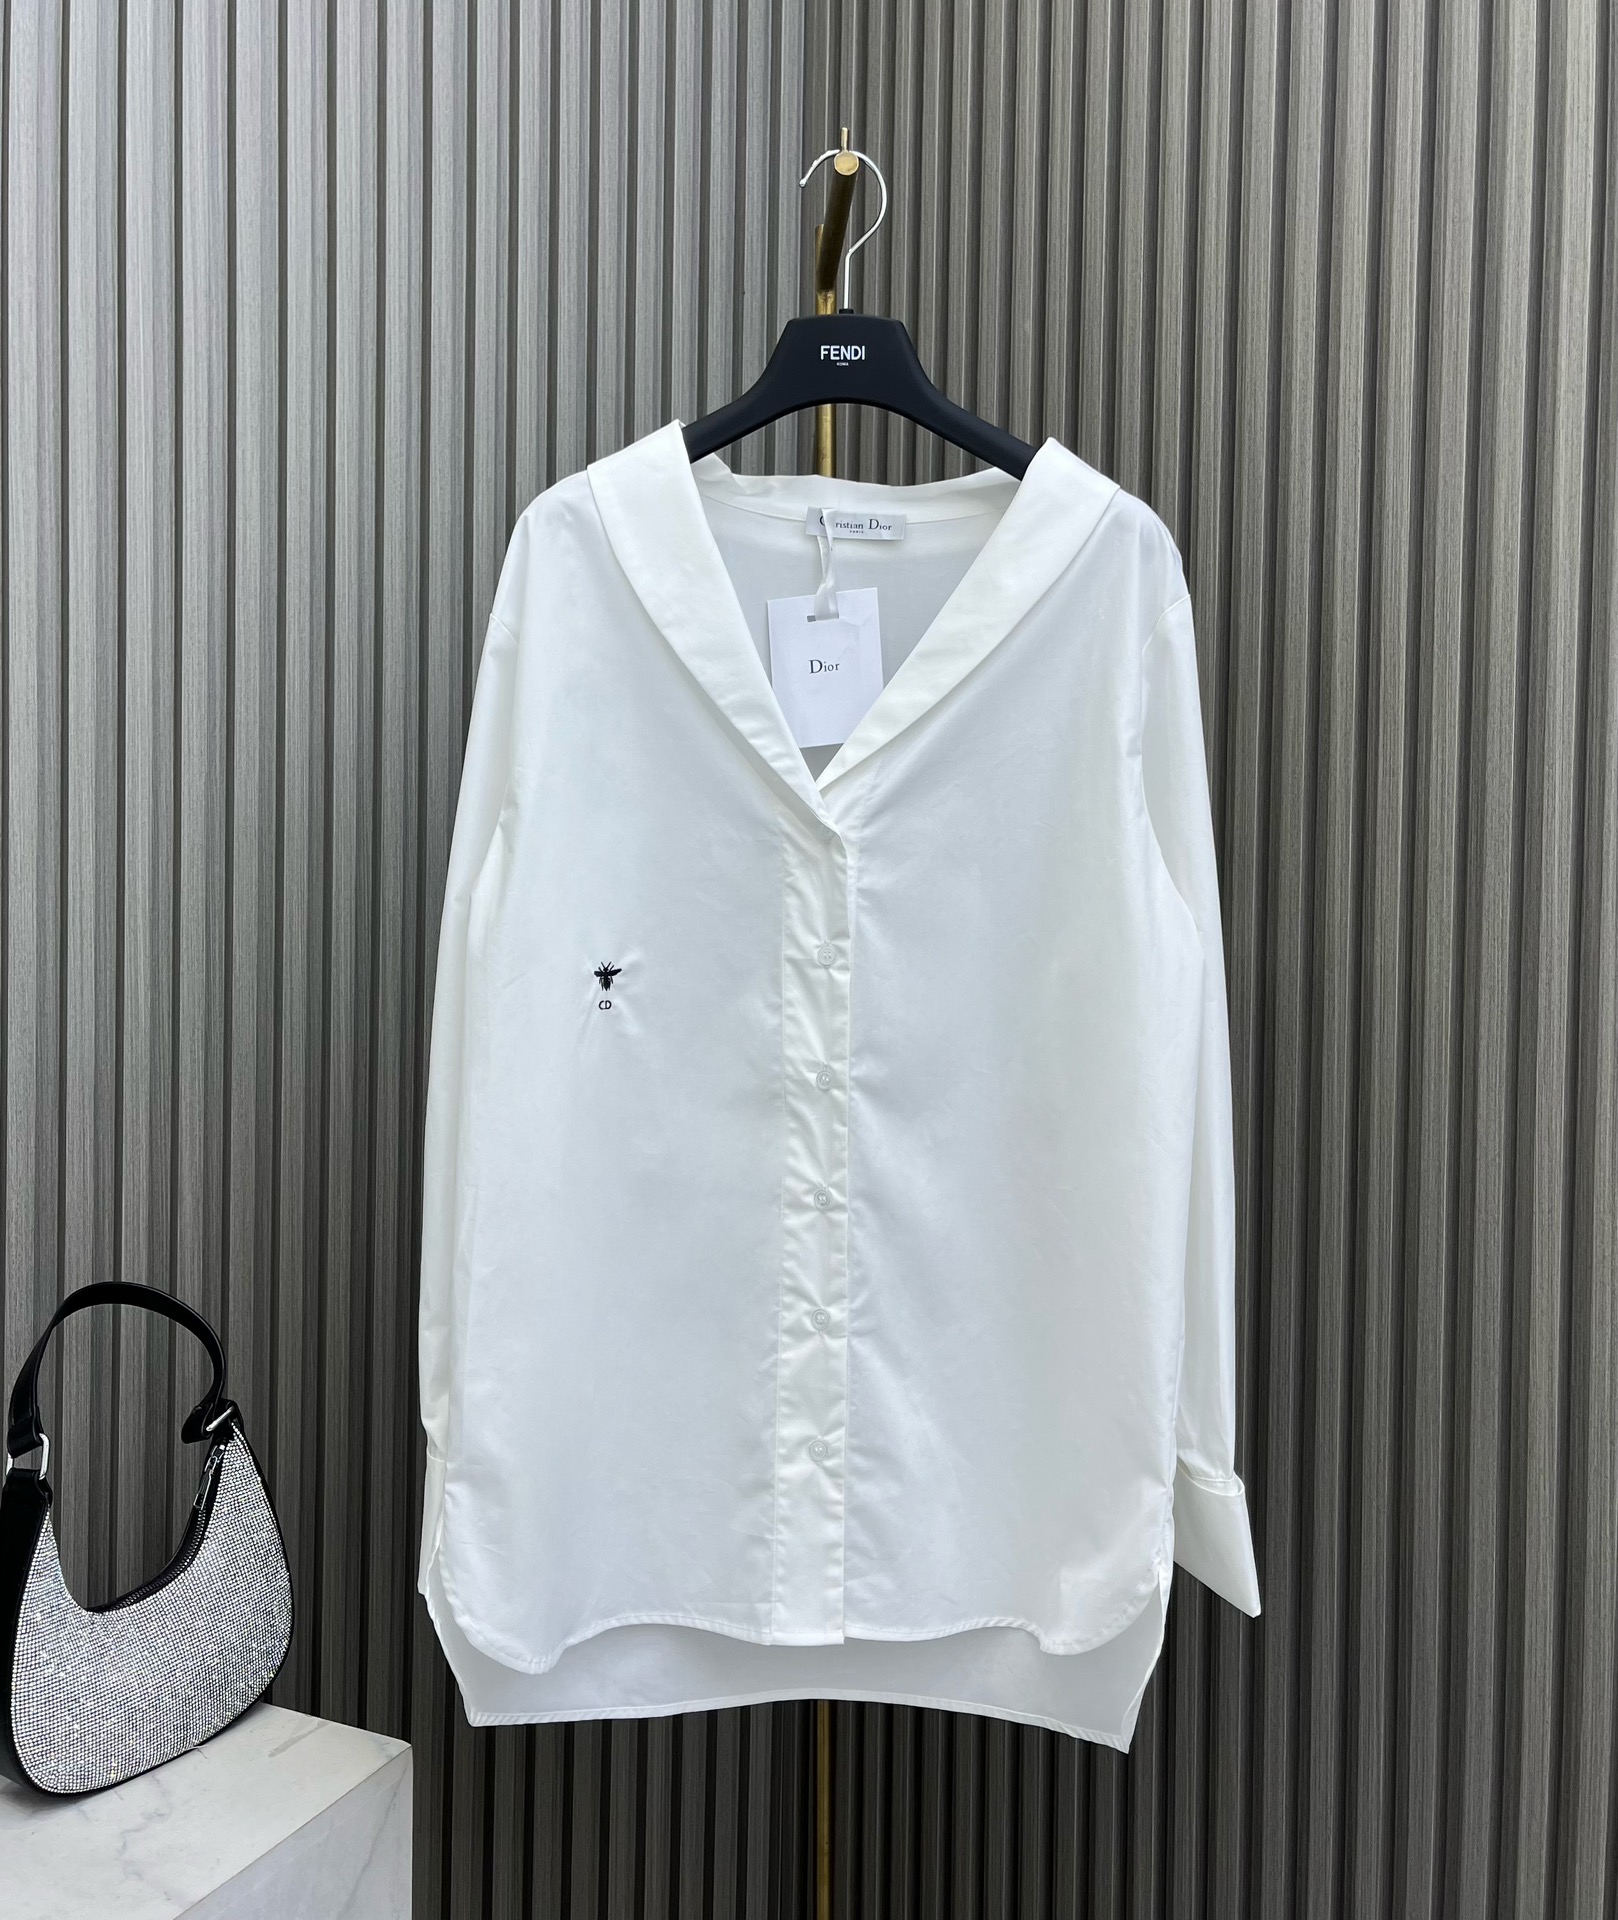 Dior Clothing Shirts & Blouses Embroidery Cotton